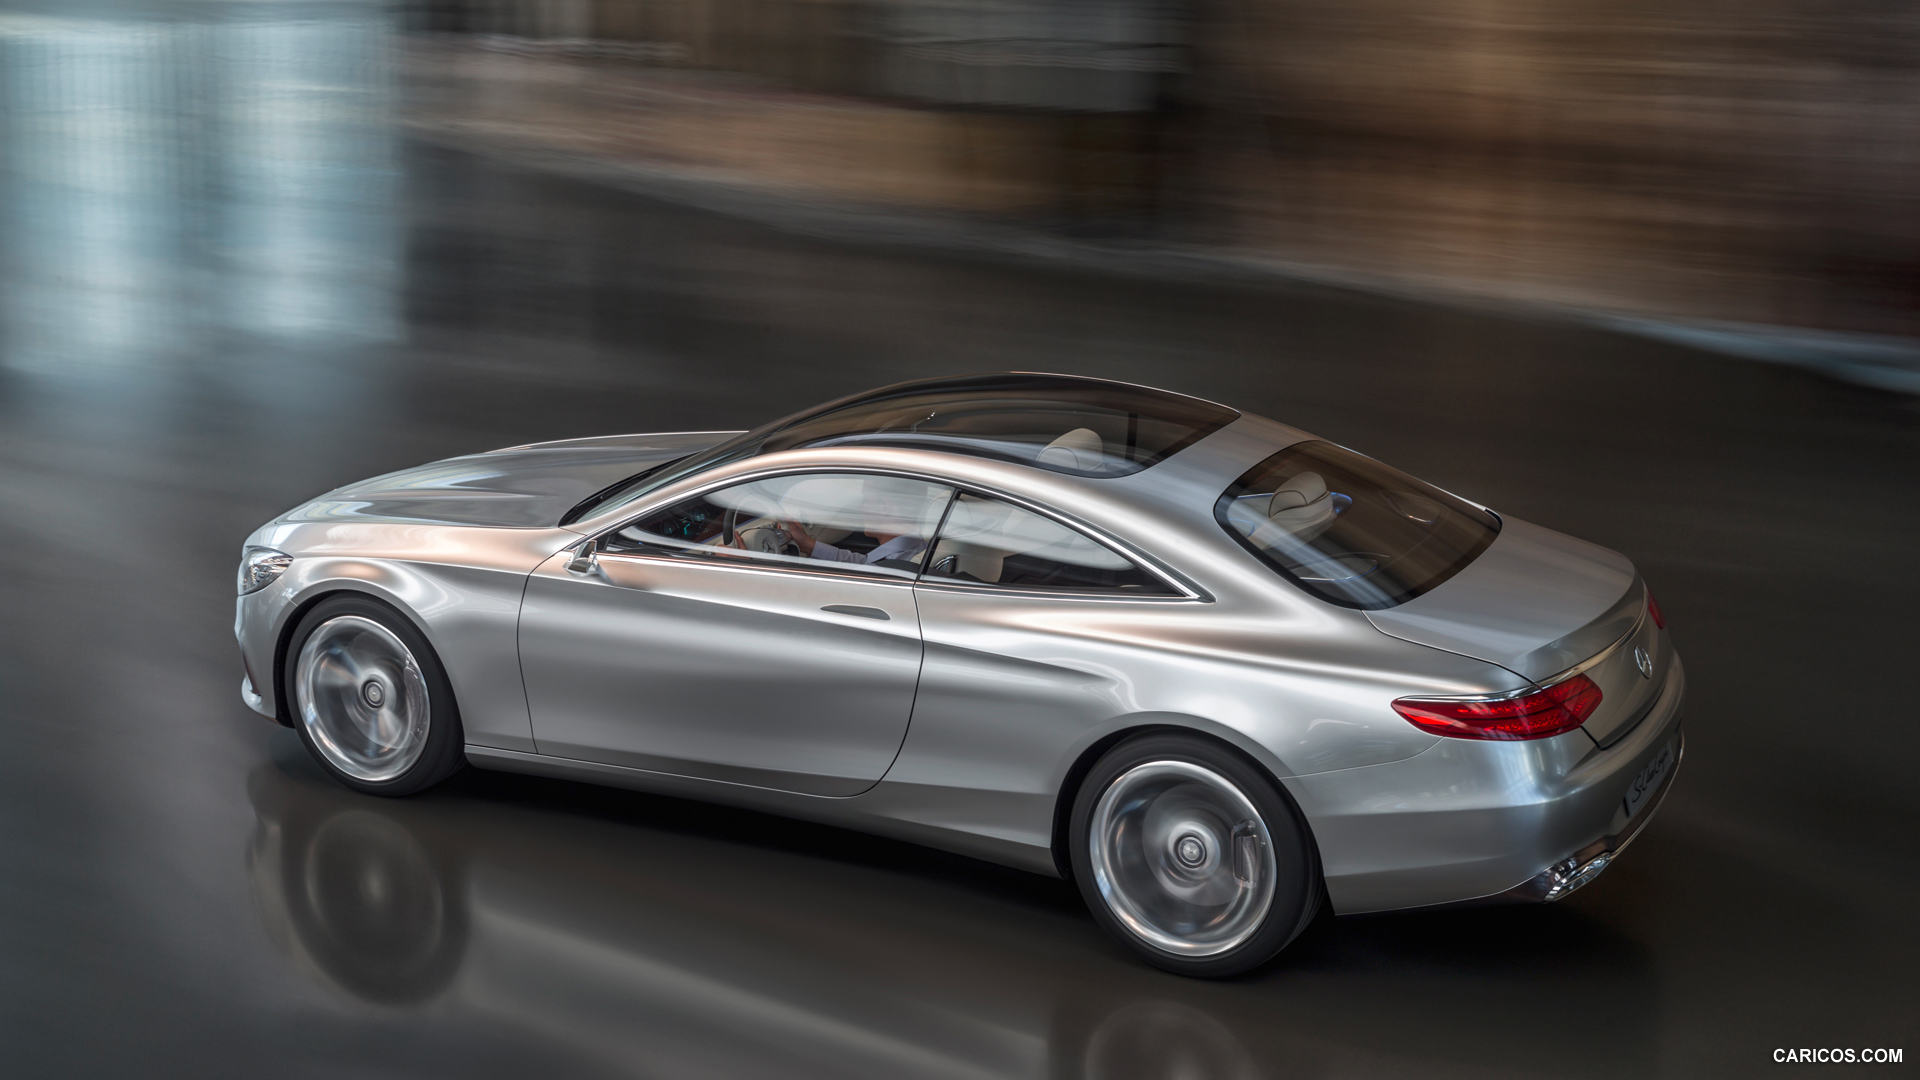 Mercedes-Benz S-Class Coupe Concept (2013)  - Side, #4 of 58